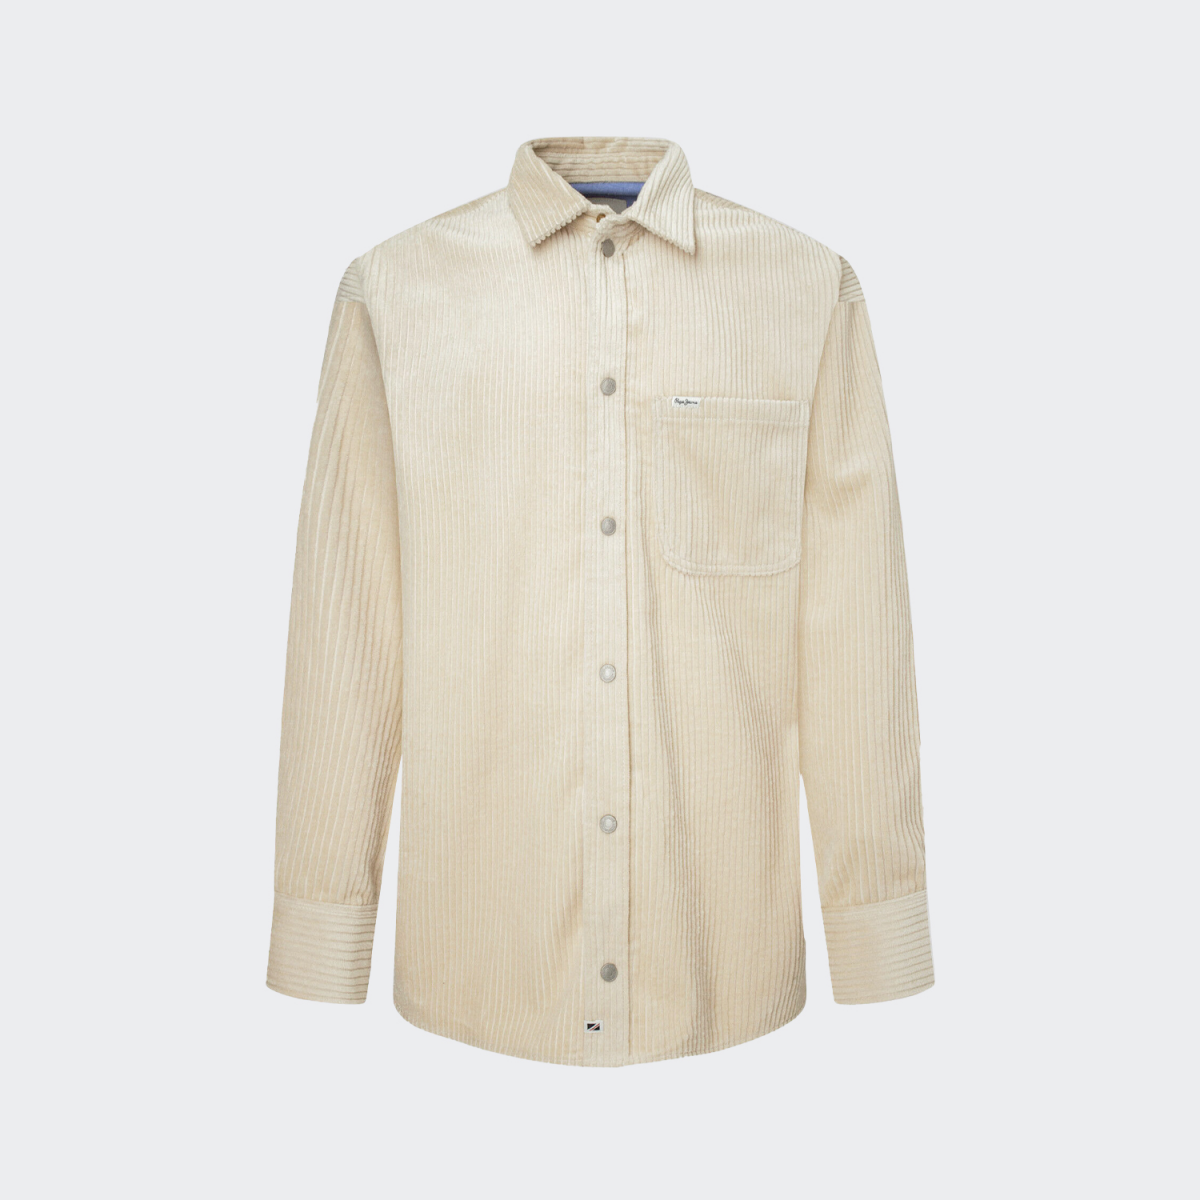 Pepe Jeans Beige Shirt Urban PM308175847_1 Project - 